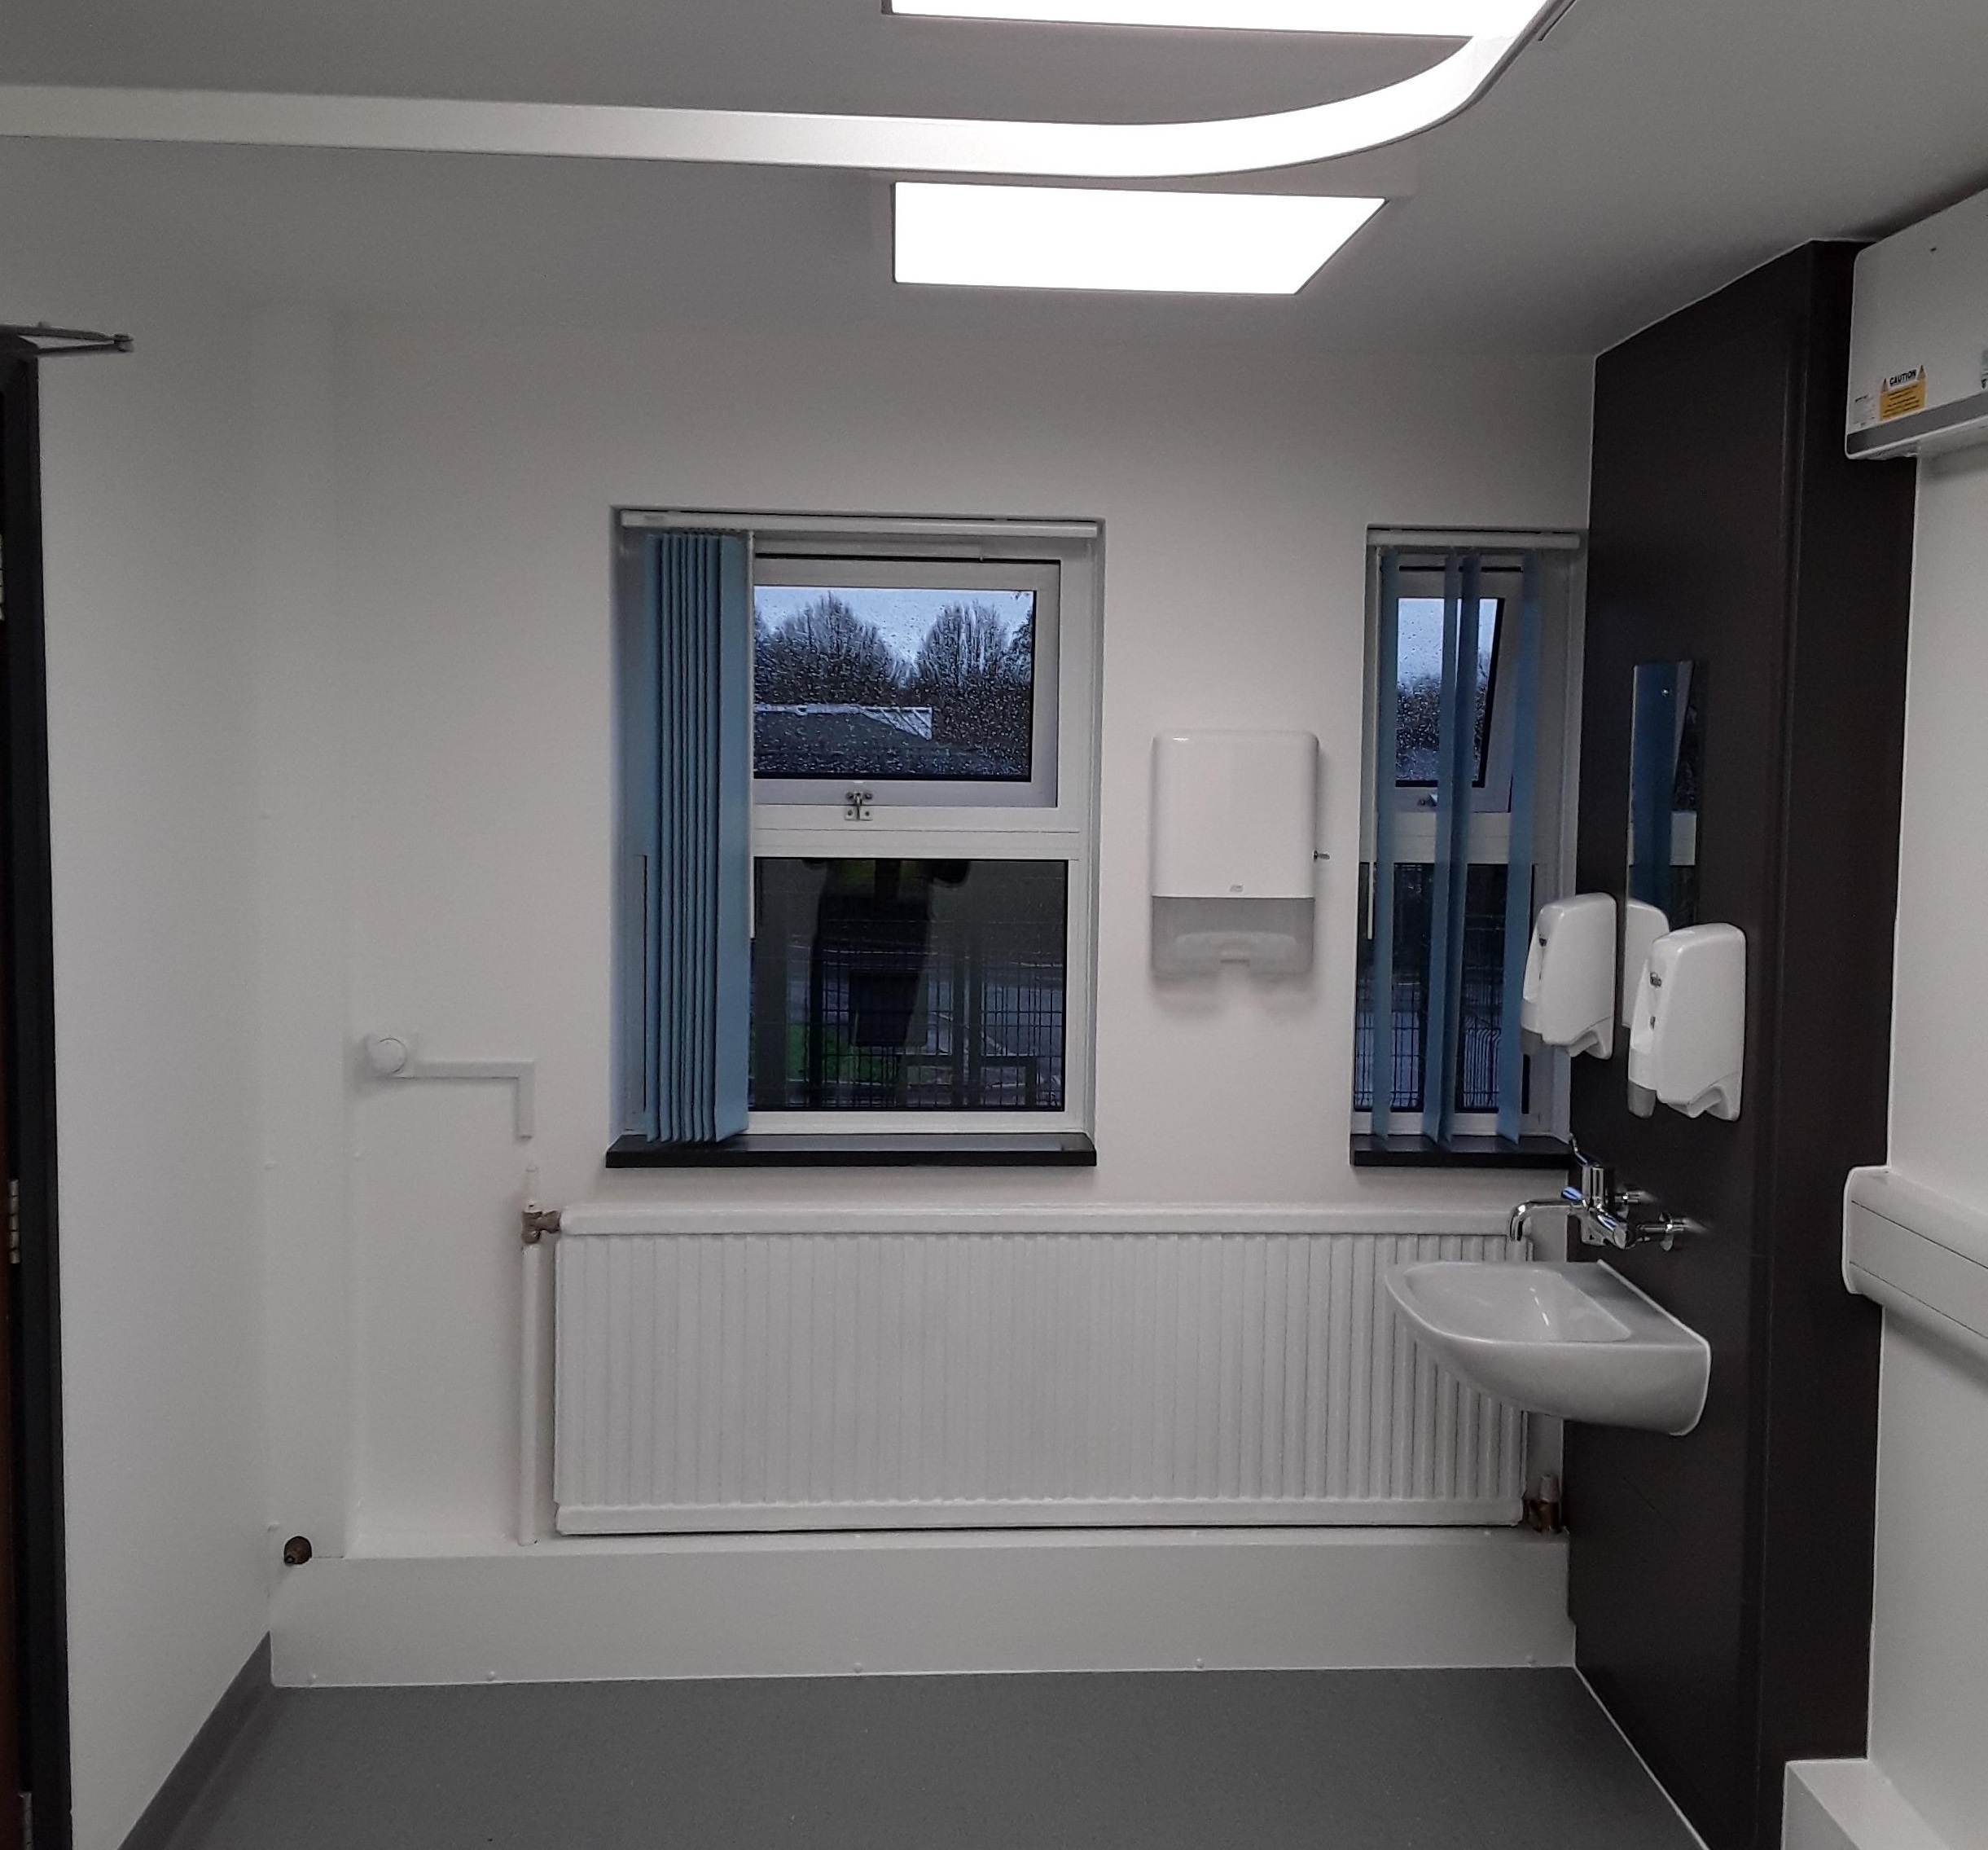 Refurbishing a health centre, providing new space for the Practice Nurse